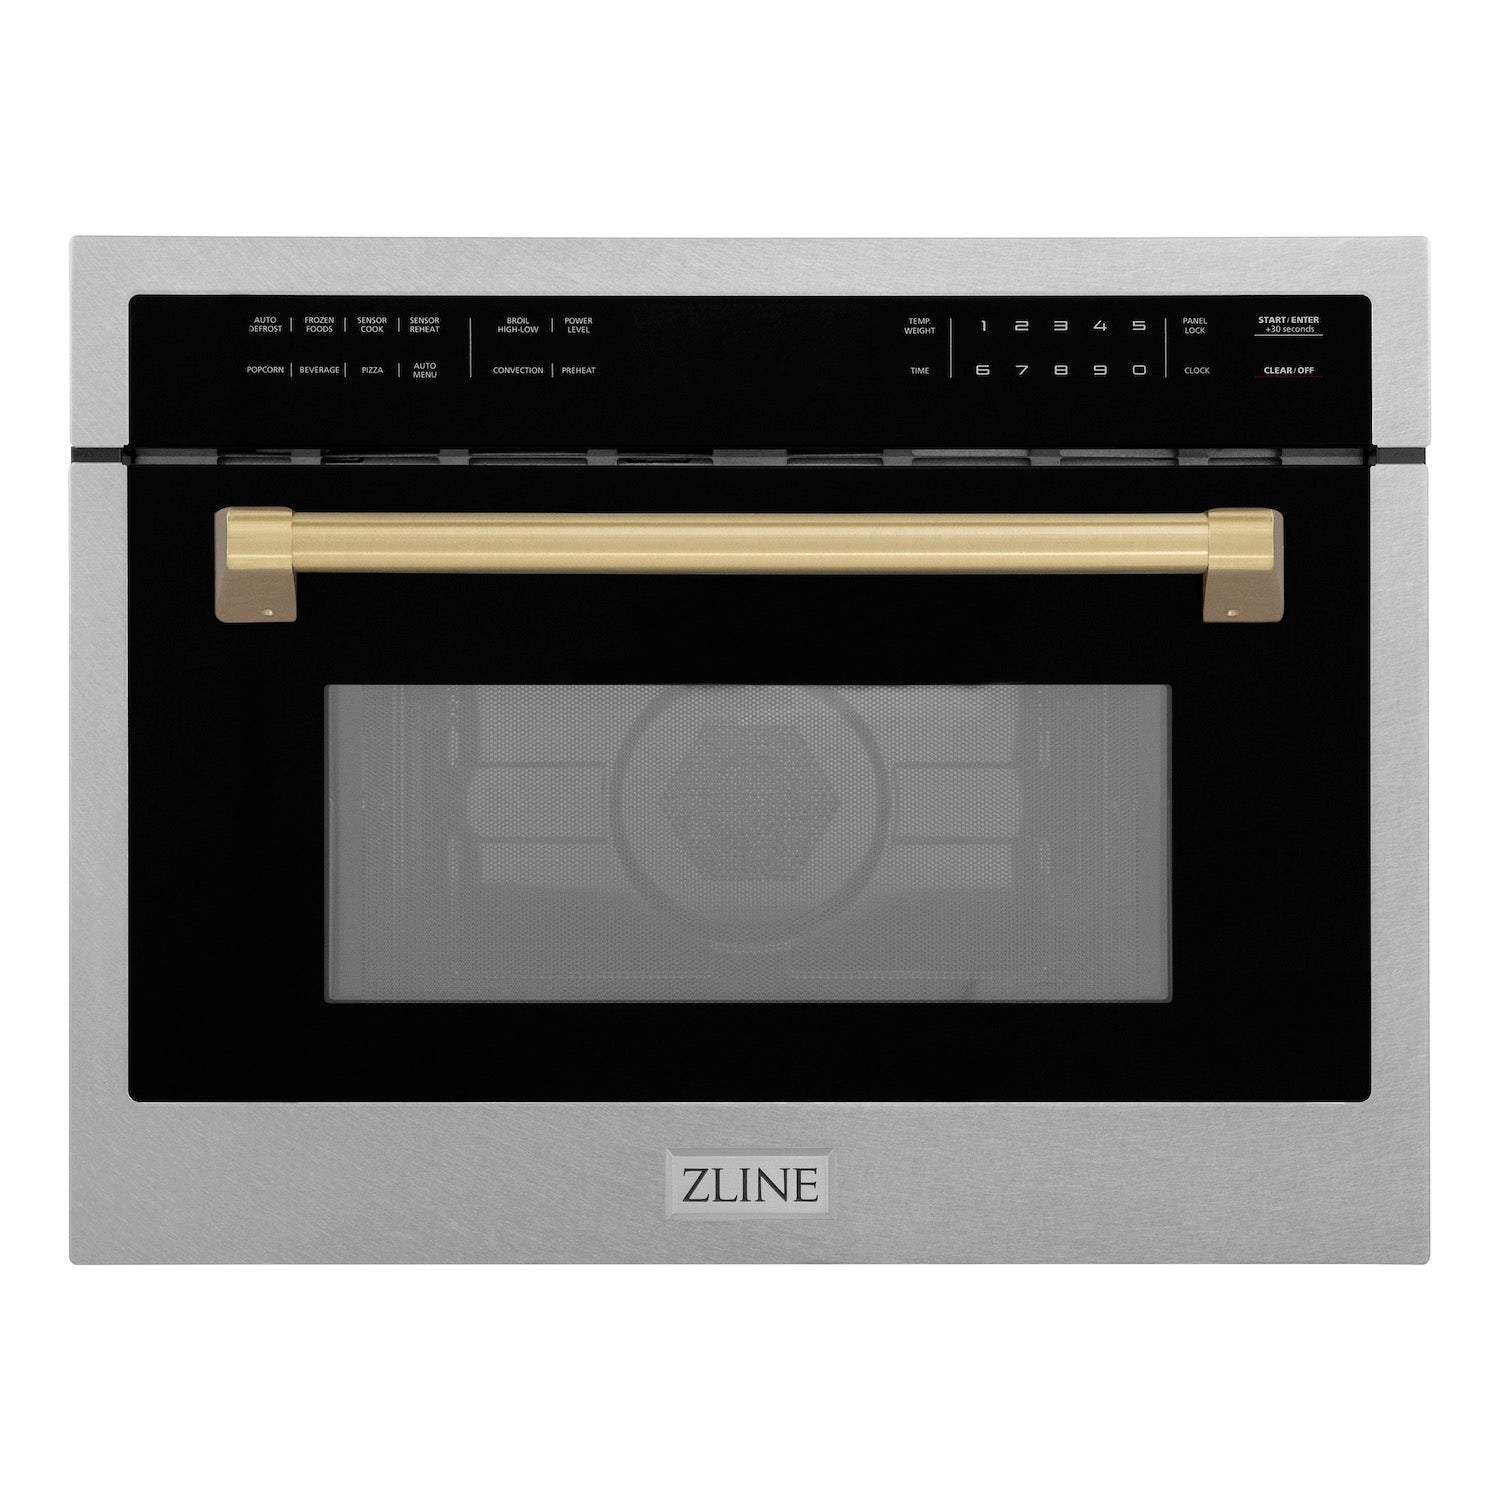 ZLINE Autograph Edition 24" Built-in Convection Microwave Oven - DuraSnow Stainless Steel with Accents